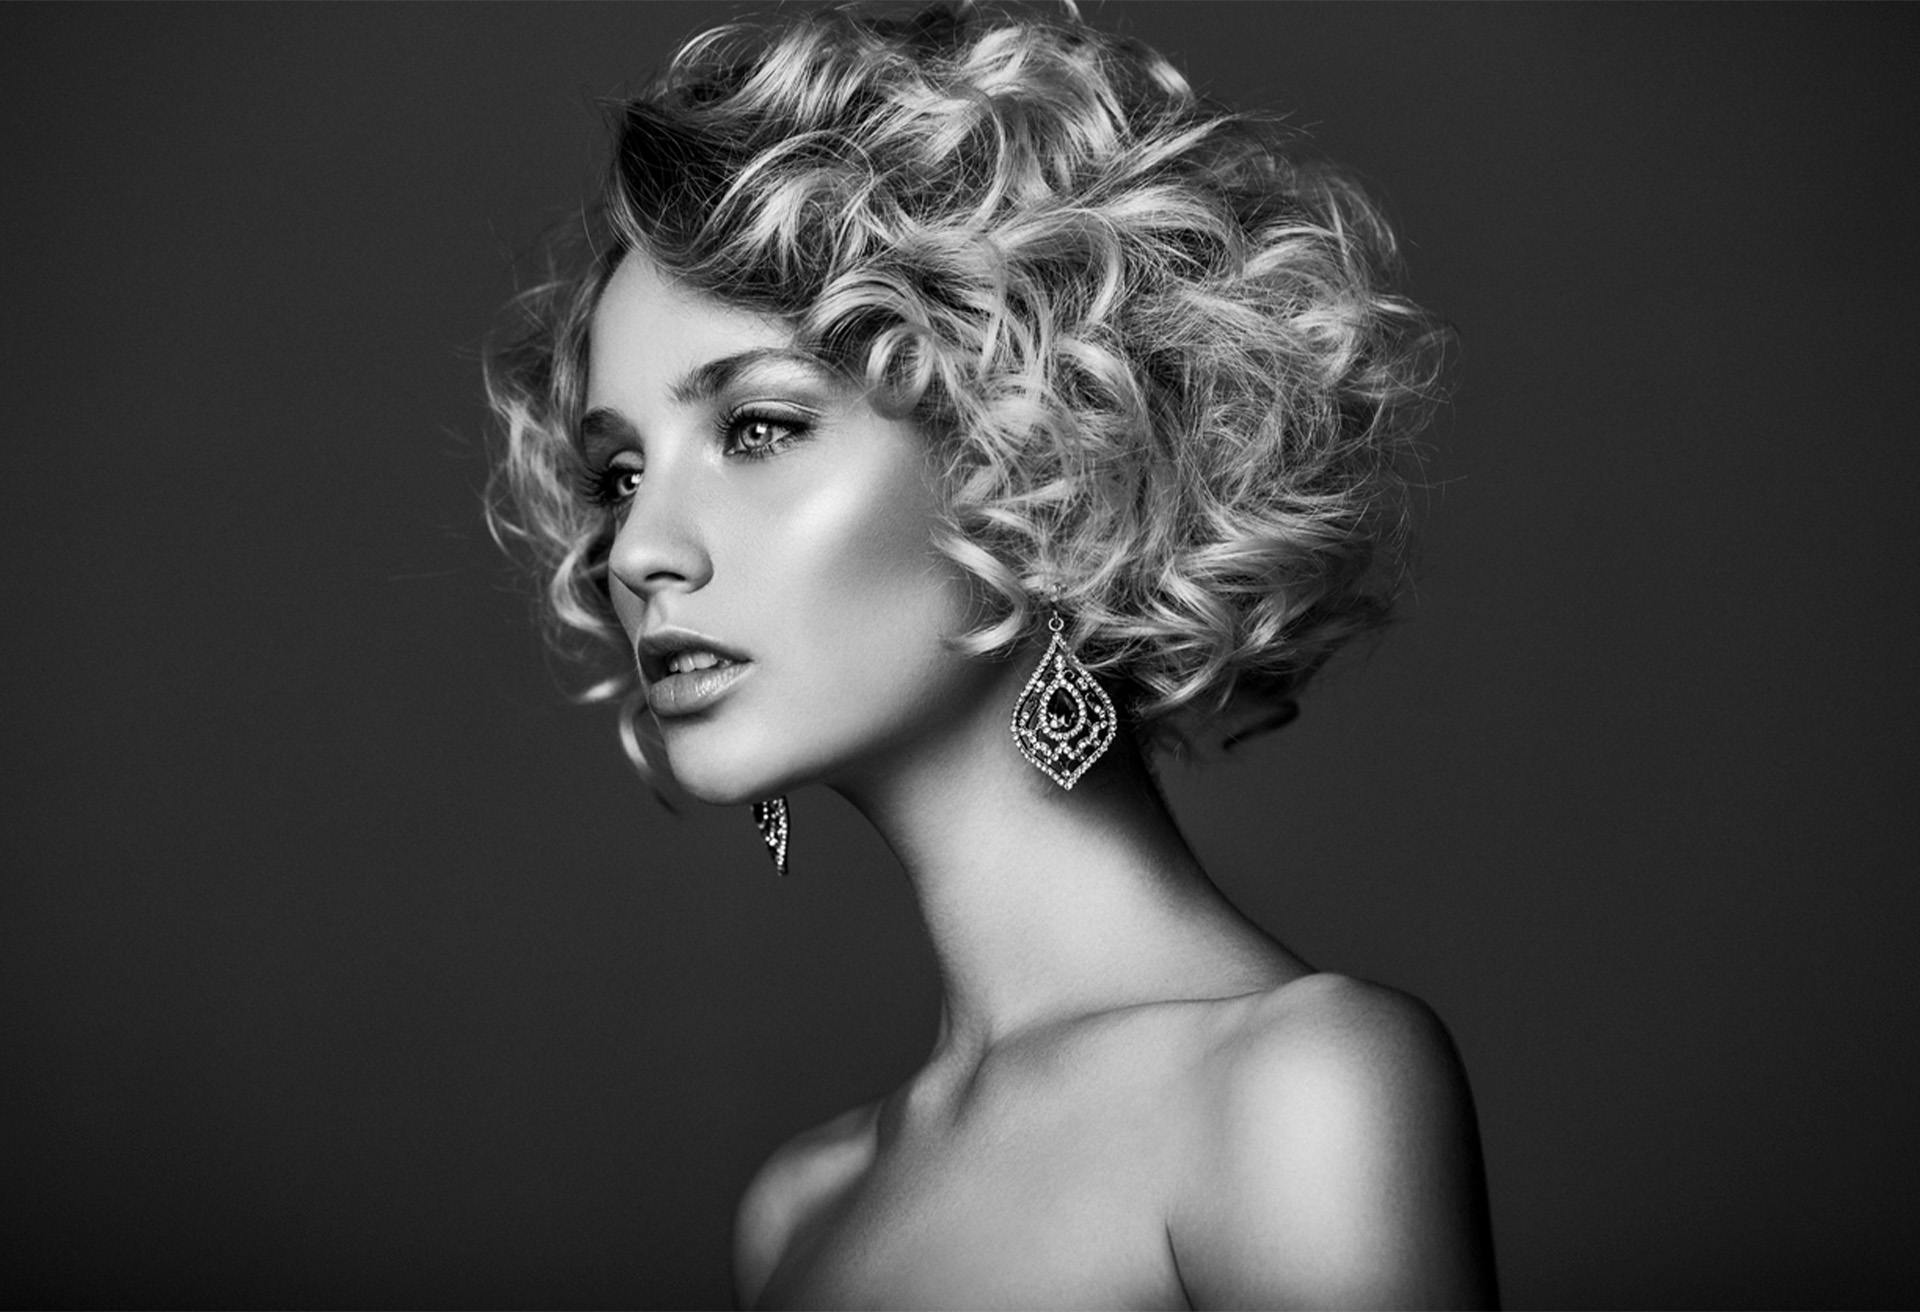 Black and white image of a glamorous woman with short curly hair and big earrings